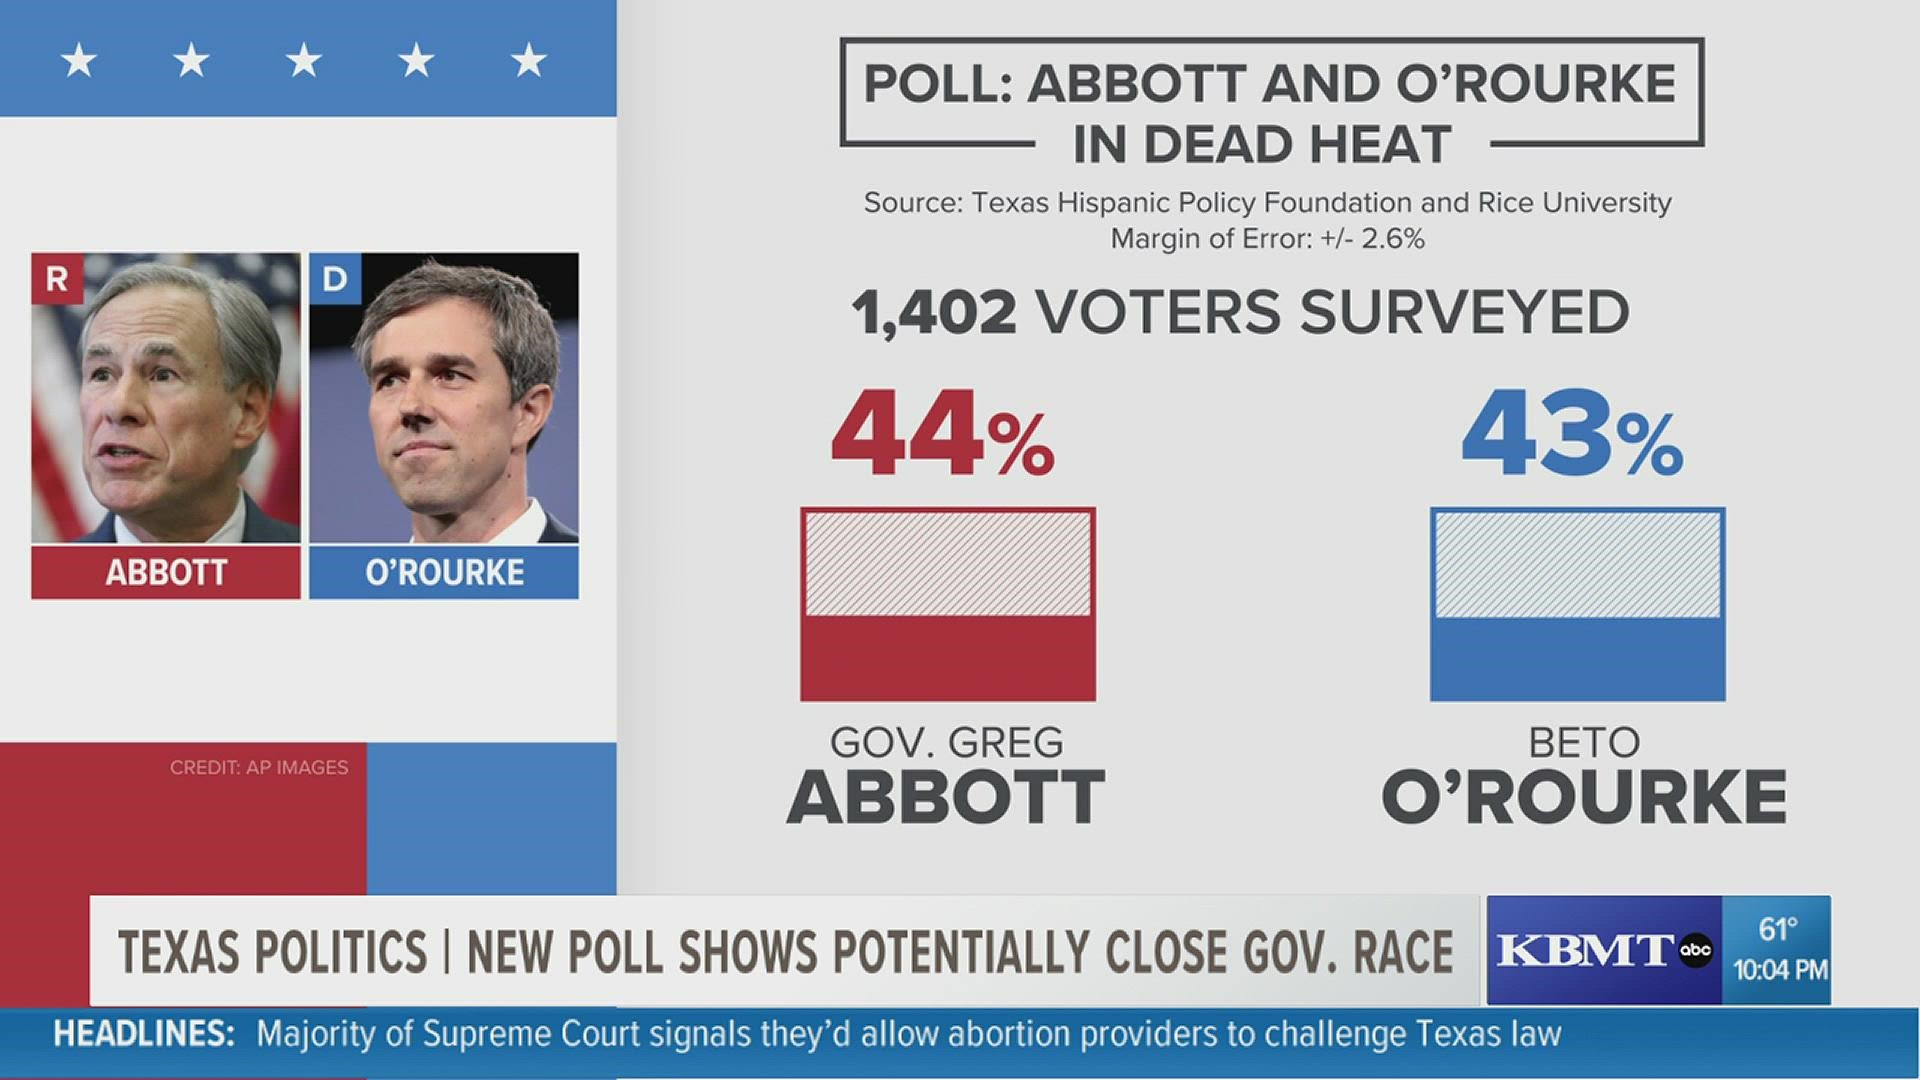 The poll shows that Beto O'Rourke is virtually tied with Texas Gov. Greg Abbott.